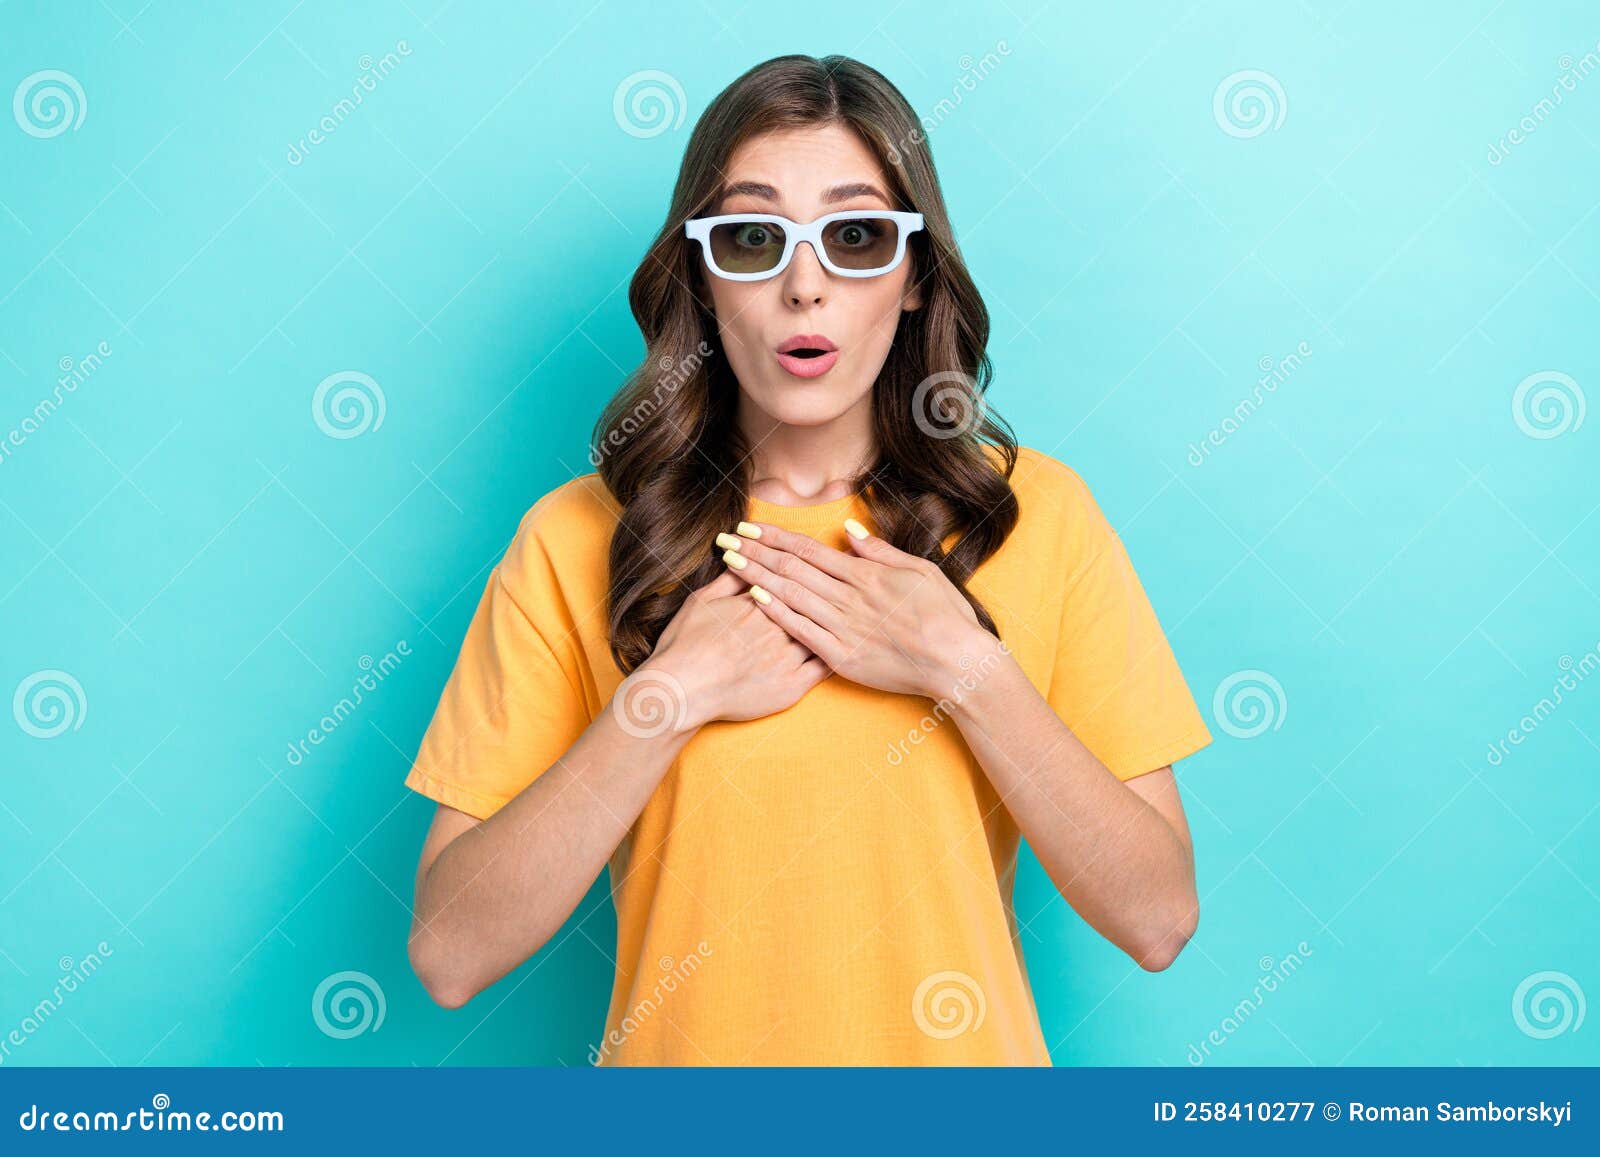 Photo Of Young Funny Excited Positive Good Mood Girl Touch Palms Chest Reaction Pouted Lips 